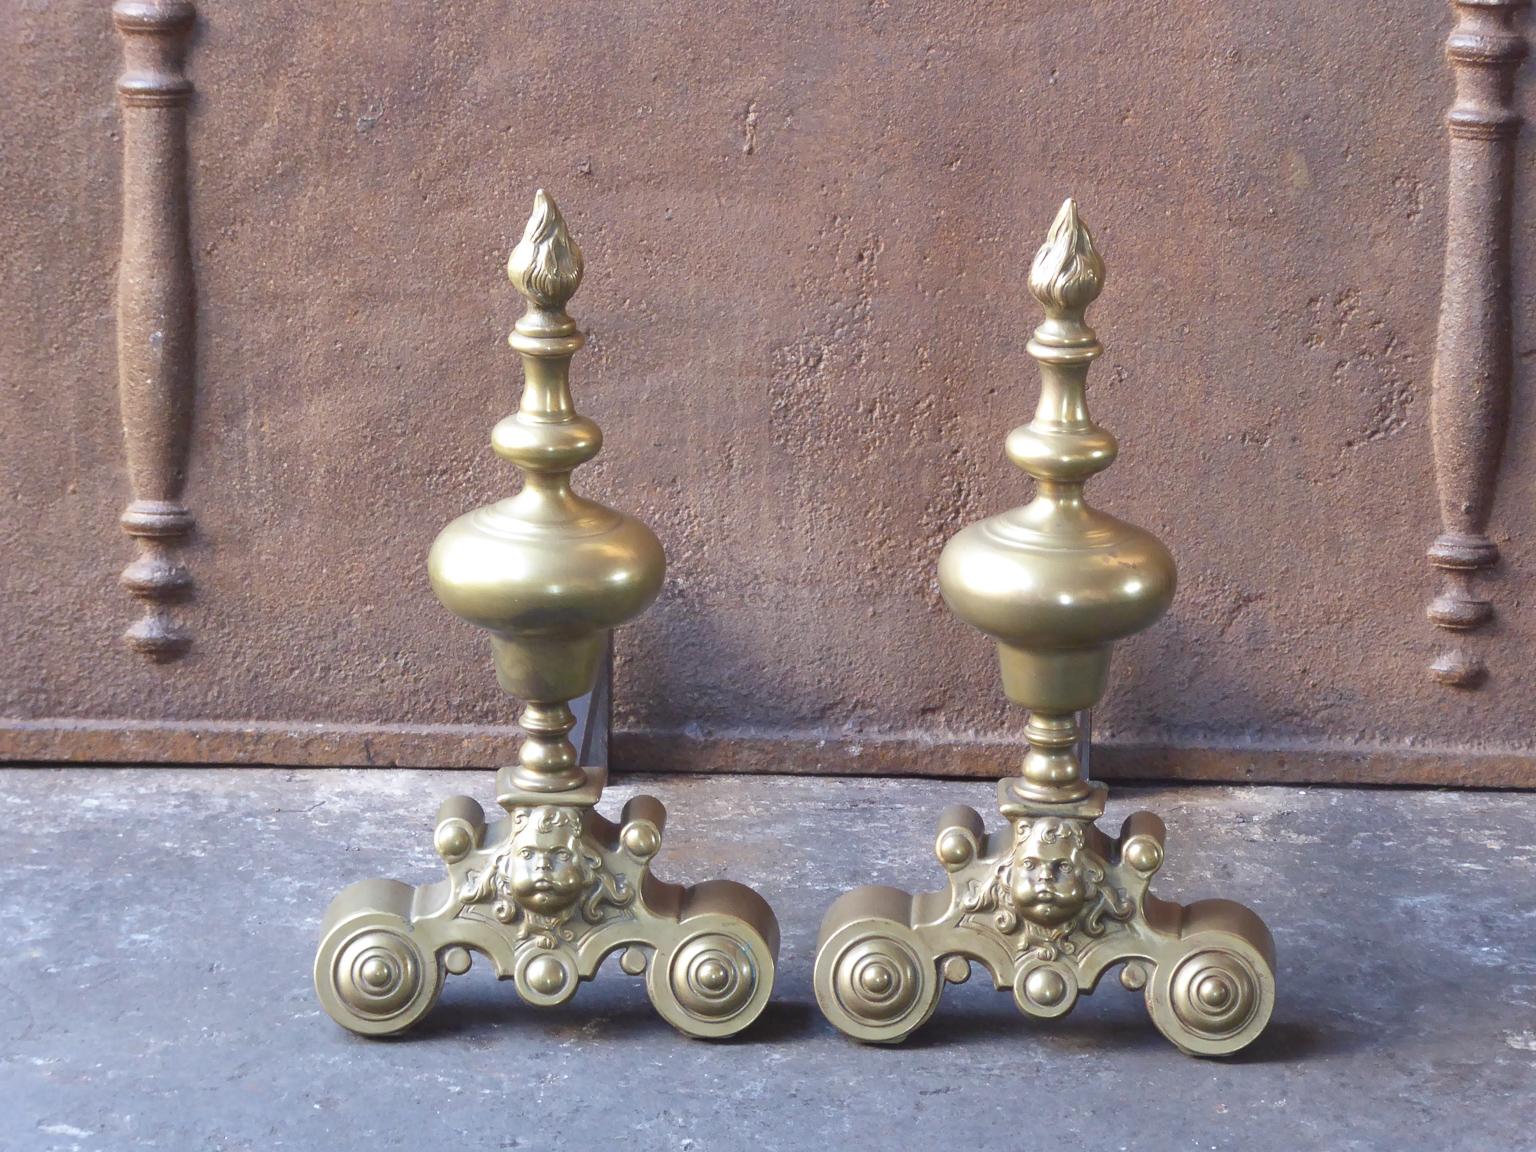 20th century French Louis XIV style andirons made of brass and wrought iron.







 